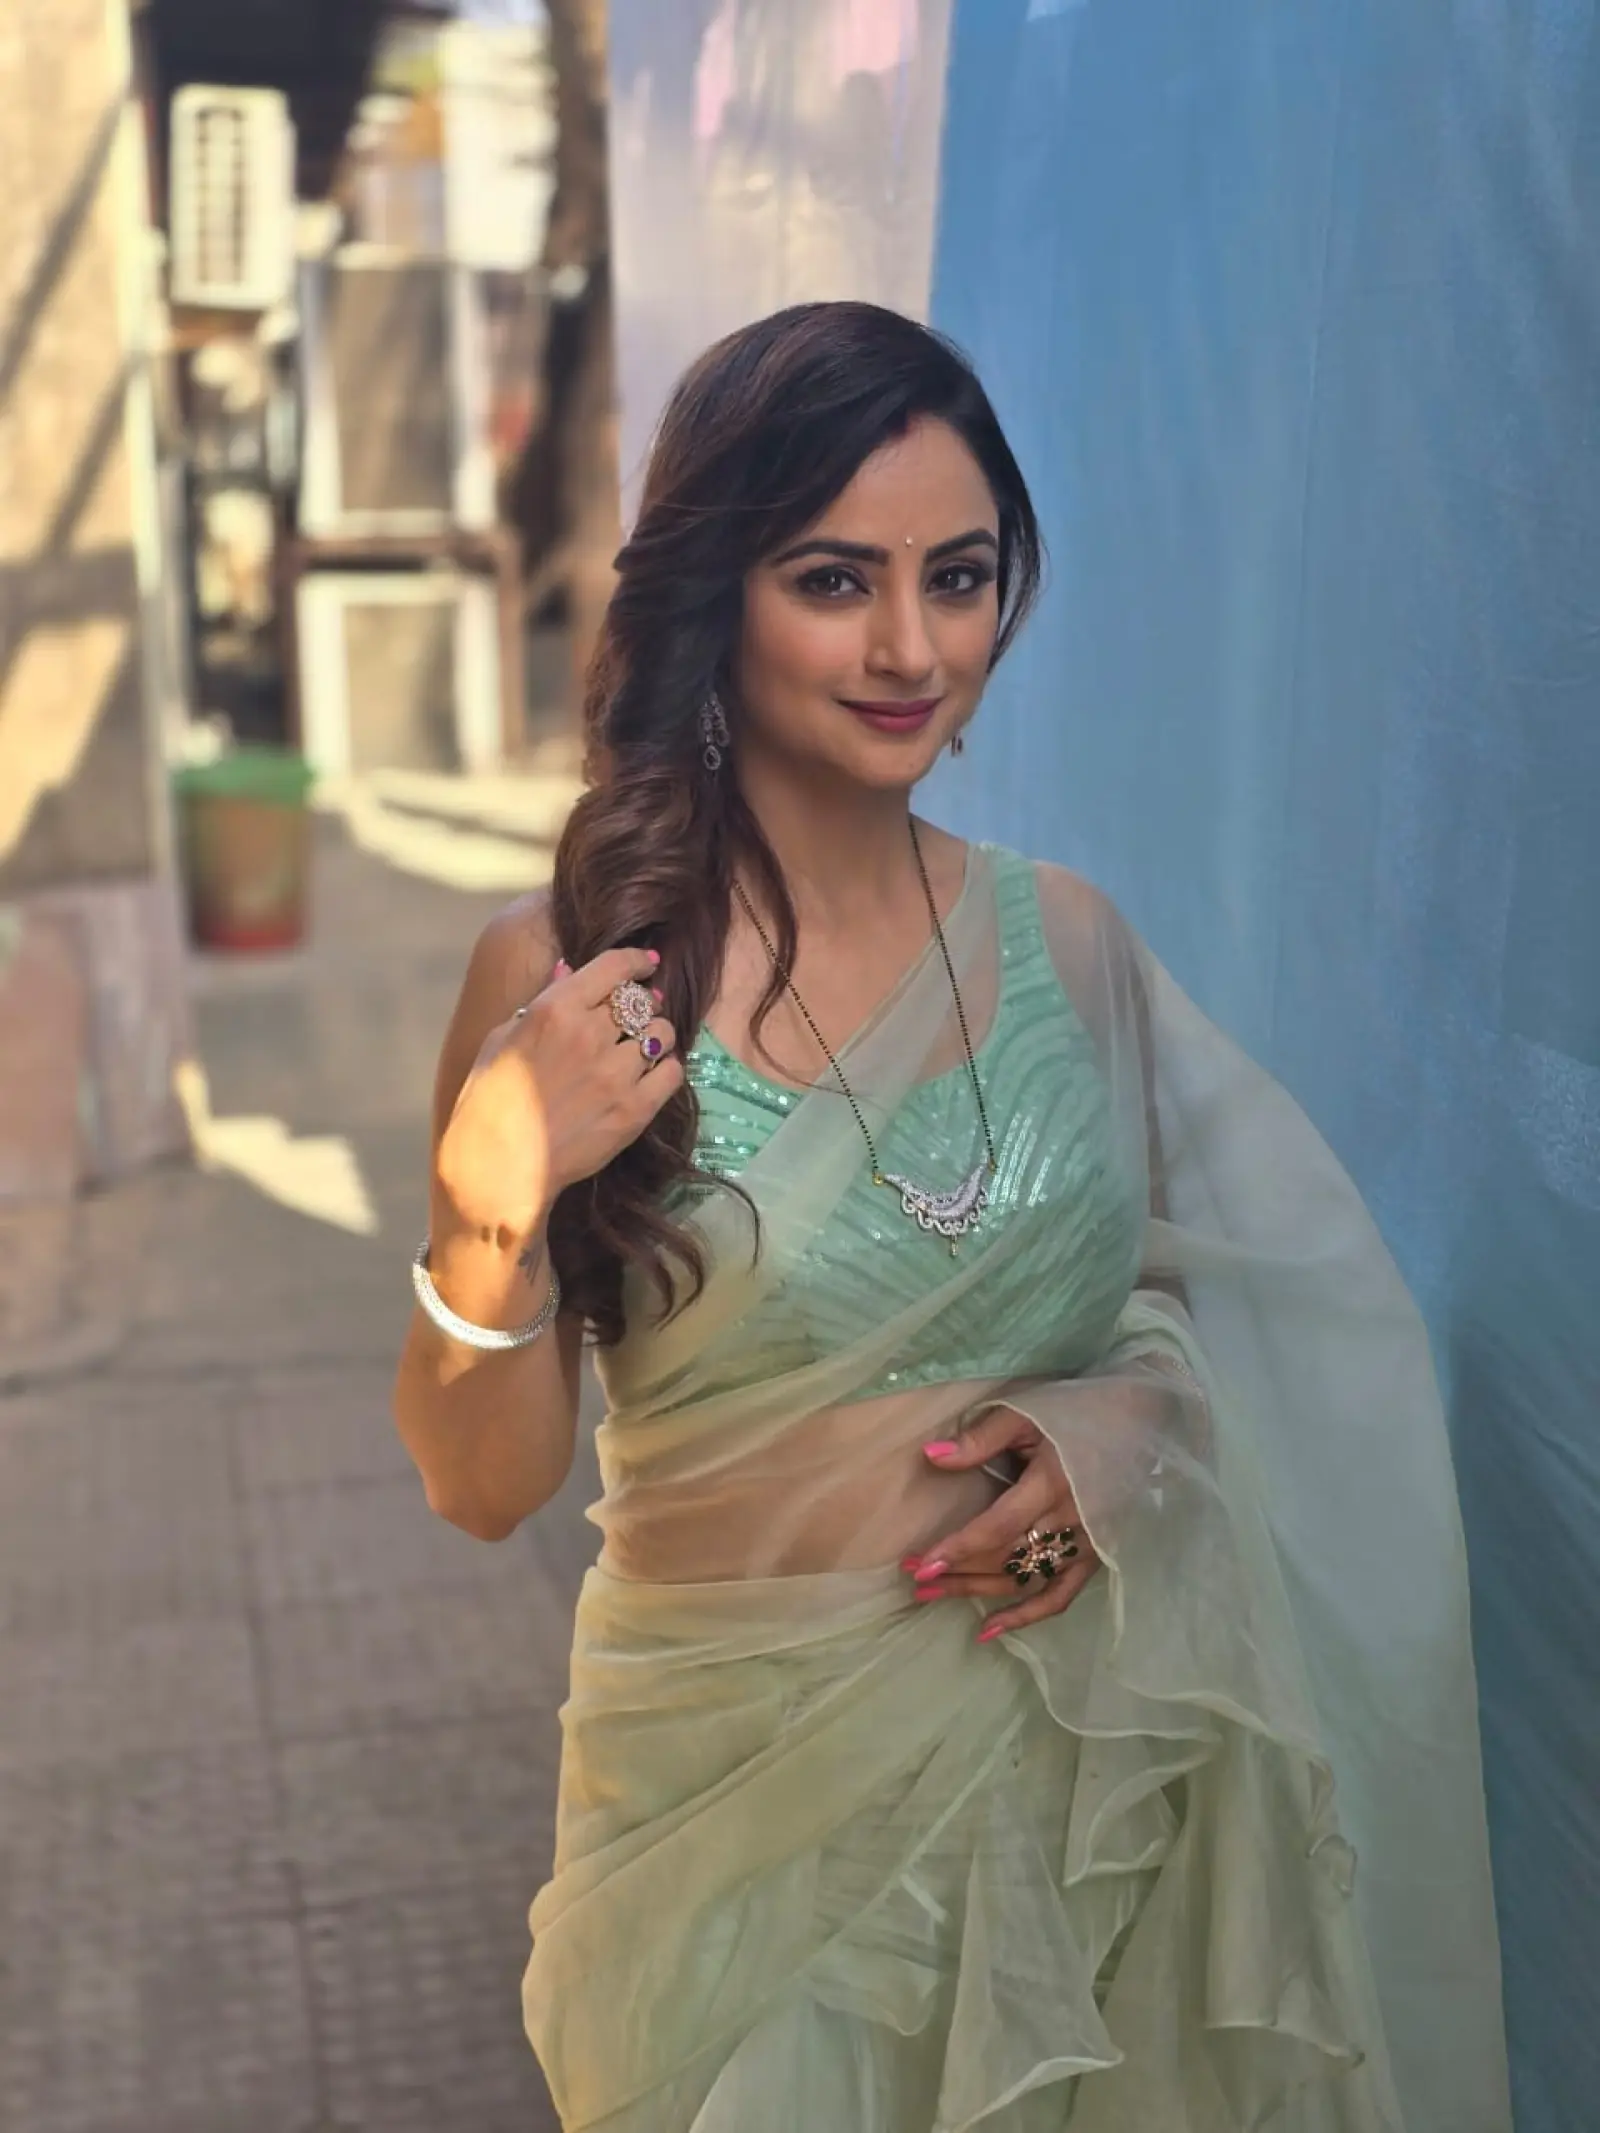 Madirakshi Mundle: Men work hard to make the ends meet, and take a lot in their stride